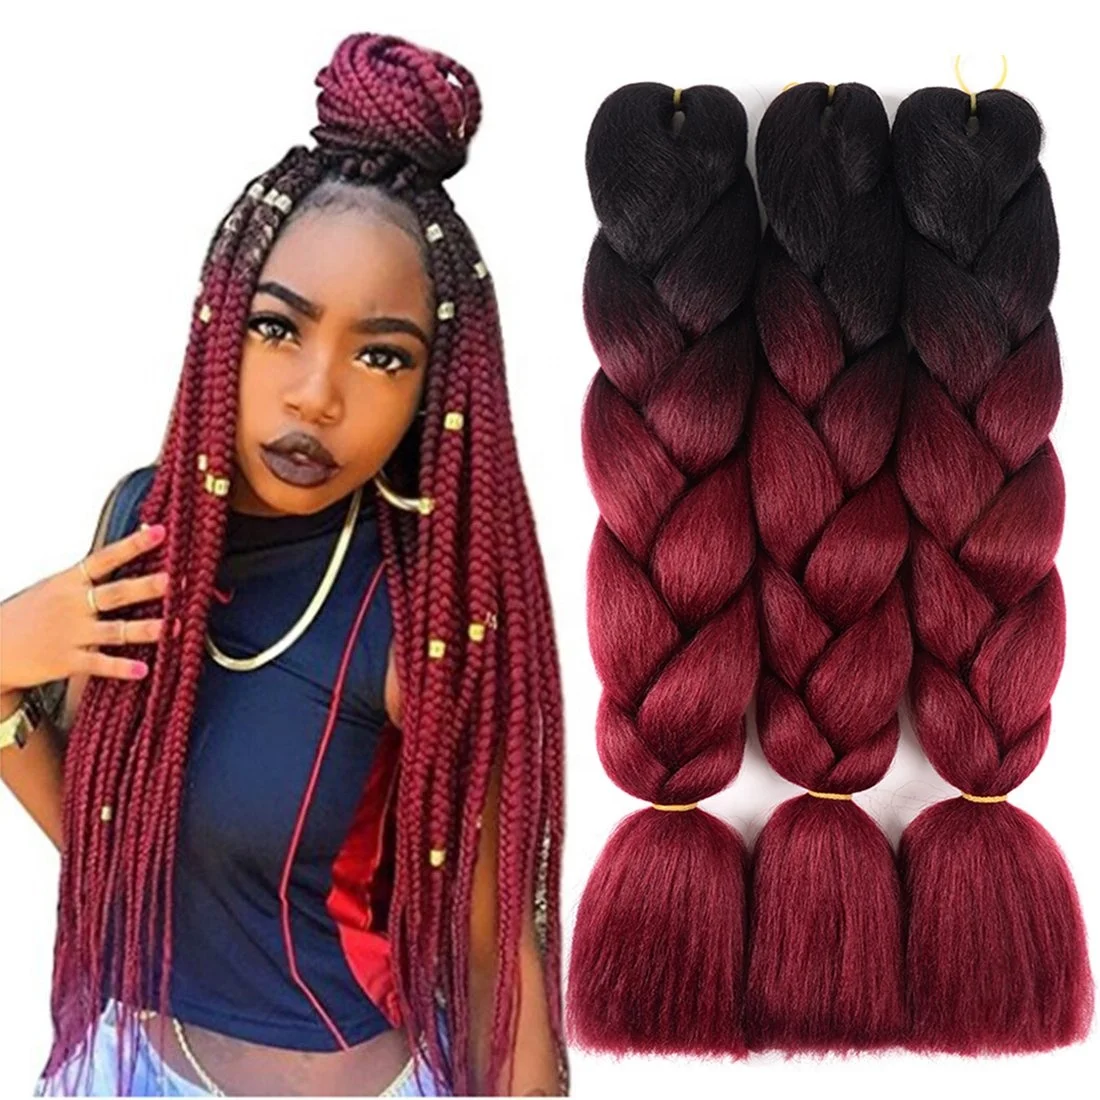 

Factory Price Wholesale Colorful 24inch Braiding Hair Extensions Jumbo Synthetic Hair for Braiding, Per color and ombre color more than 97 colors available